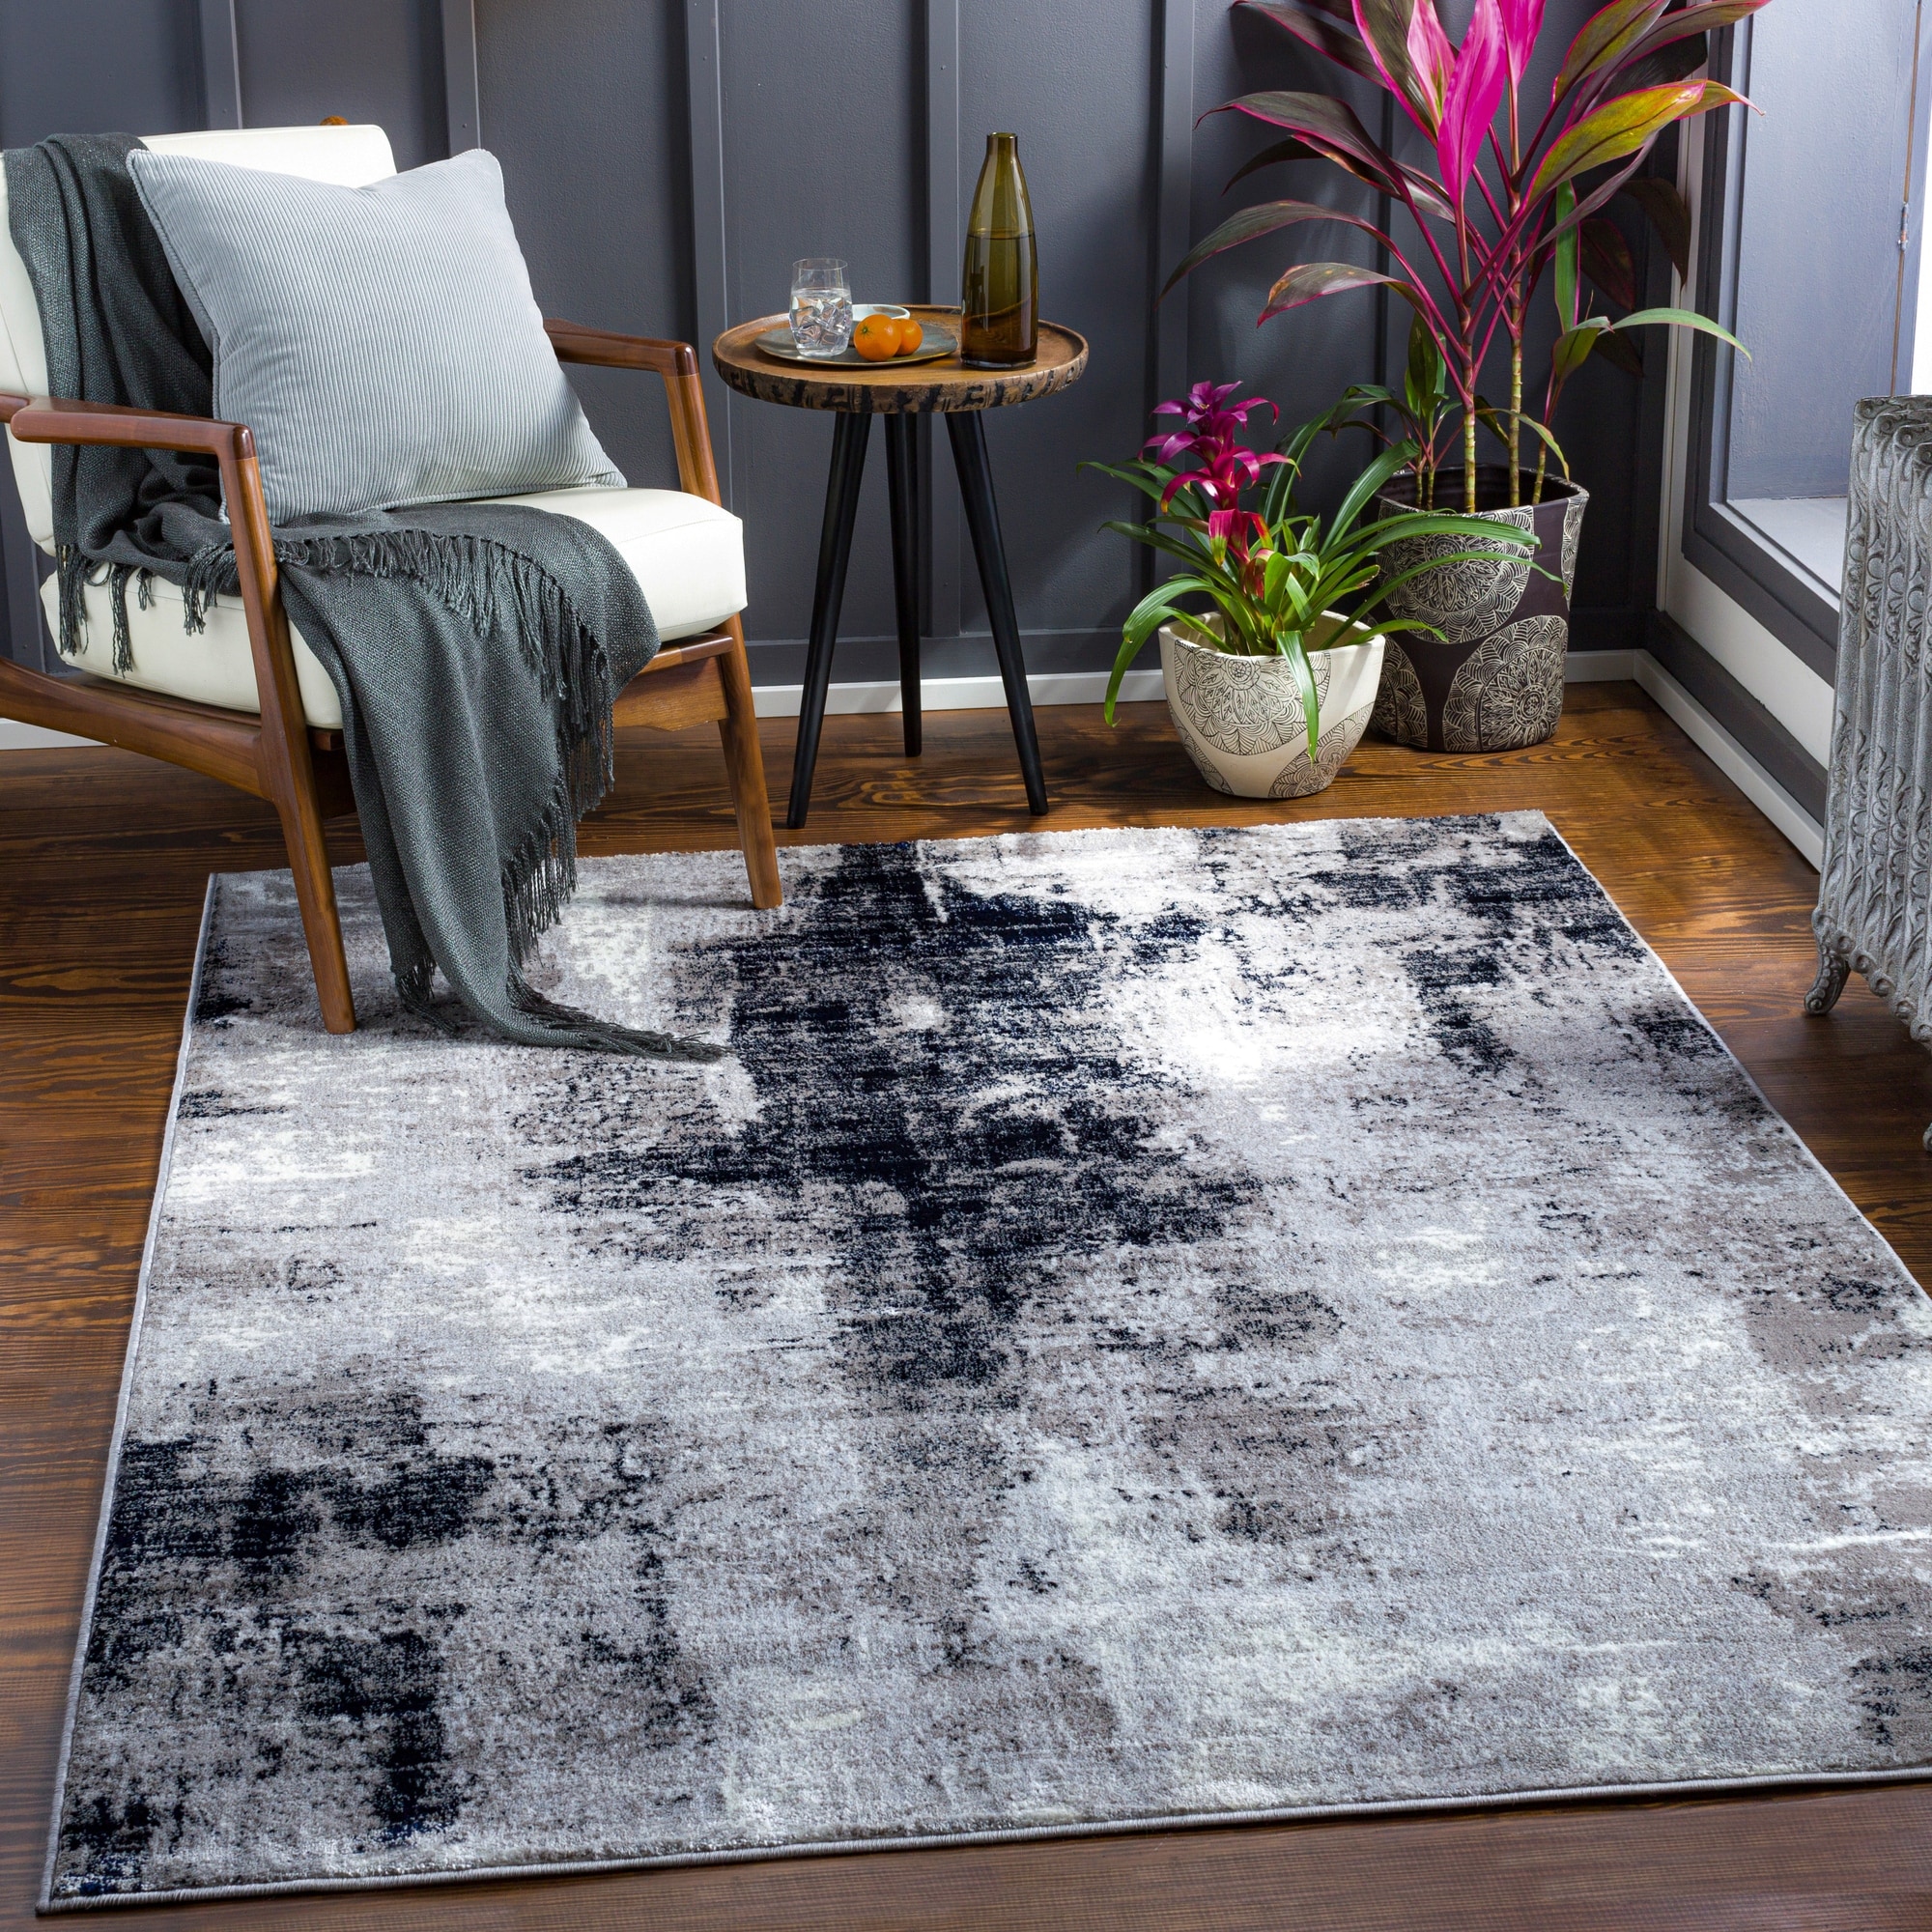 https://ak1.ostkcdn.com/images/products/is/images/direct/e5685e22ffef101c051cb2b2e6bcc1f5deefaa91/Cooke-Industrial-Abstract-Polyester-Area-Rug.jpg